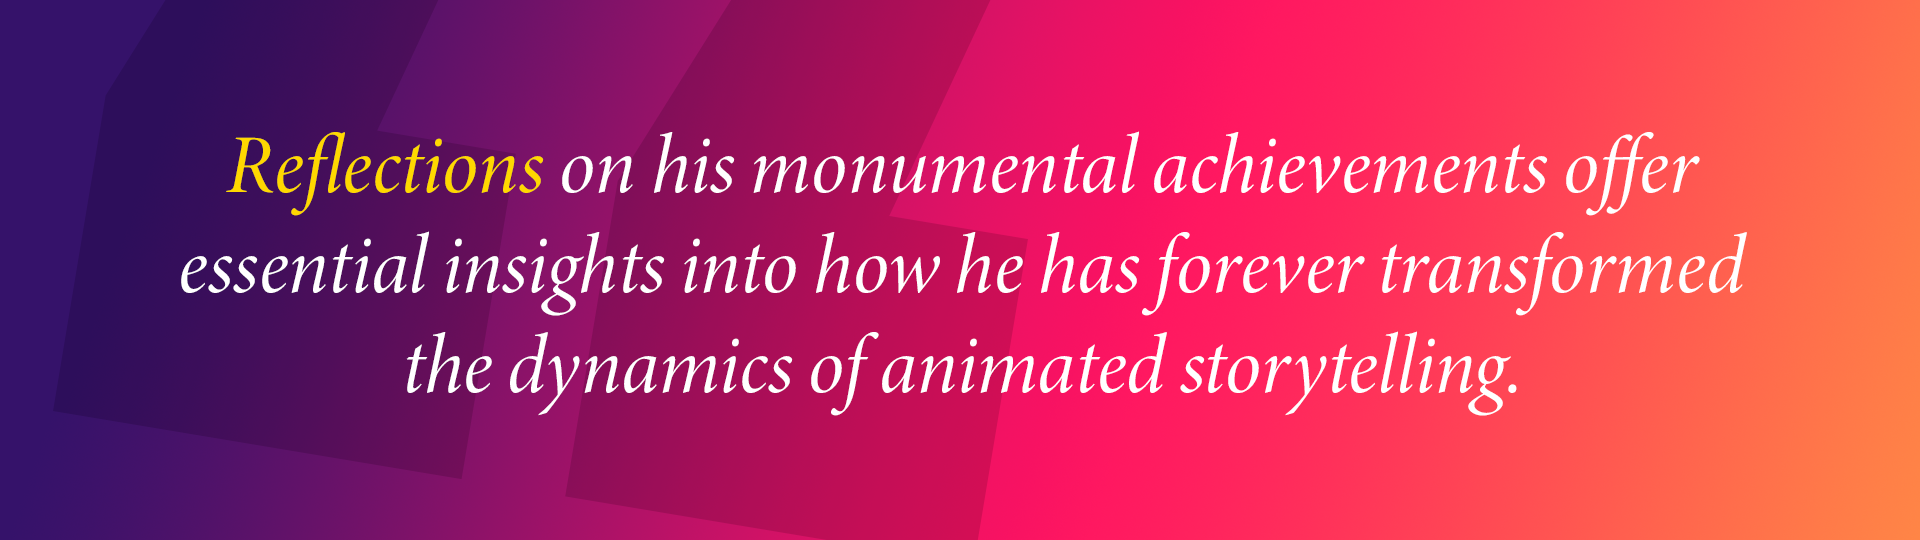 Reflections on his monumental achievements offer
essential insights into how he has forever transformed the dynamics of animated storytelling.